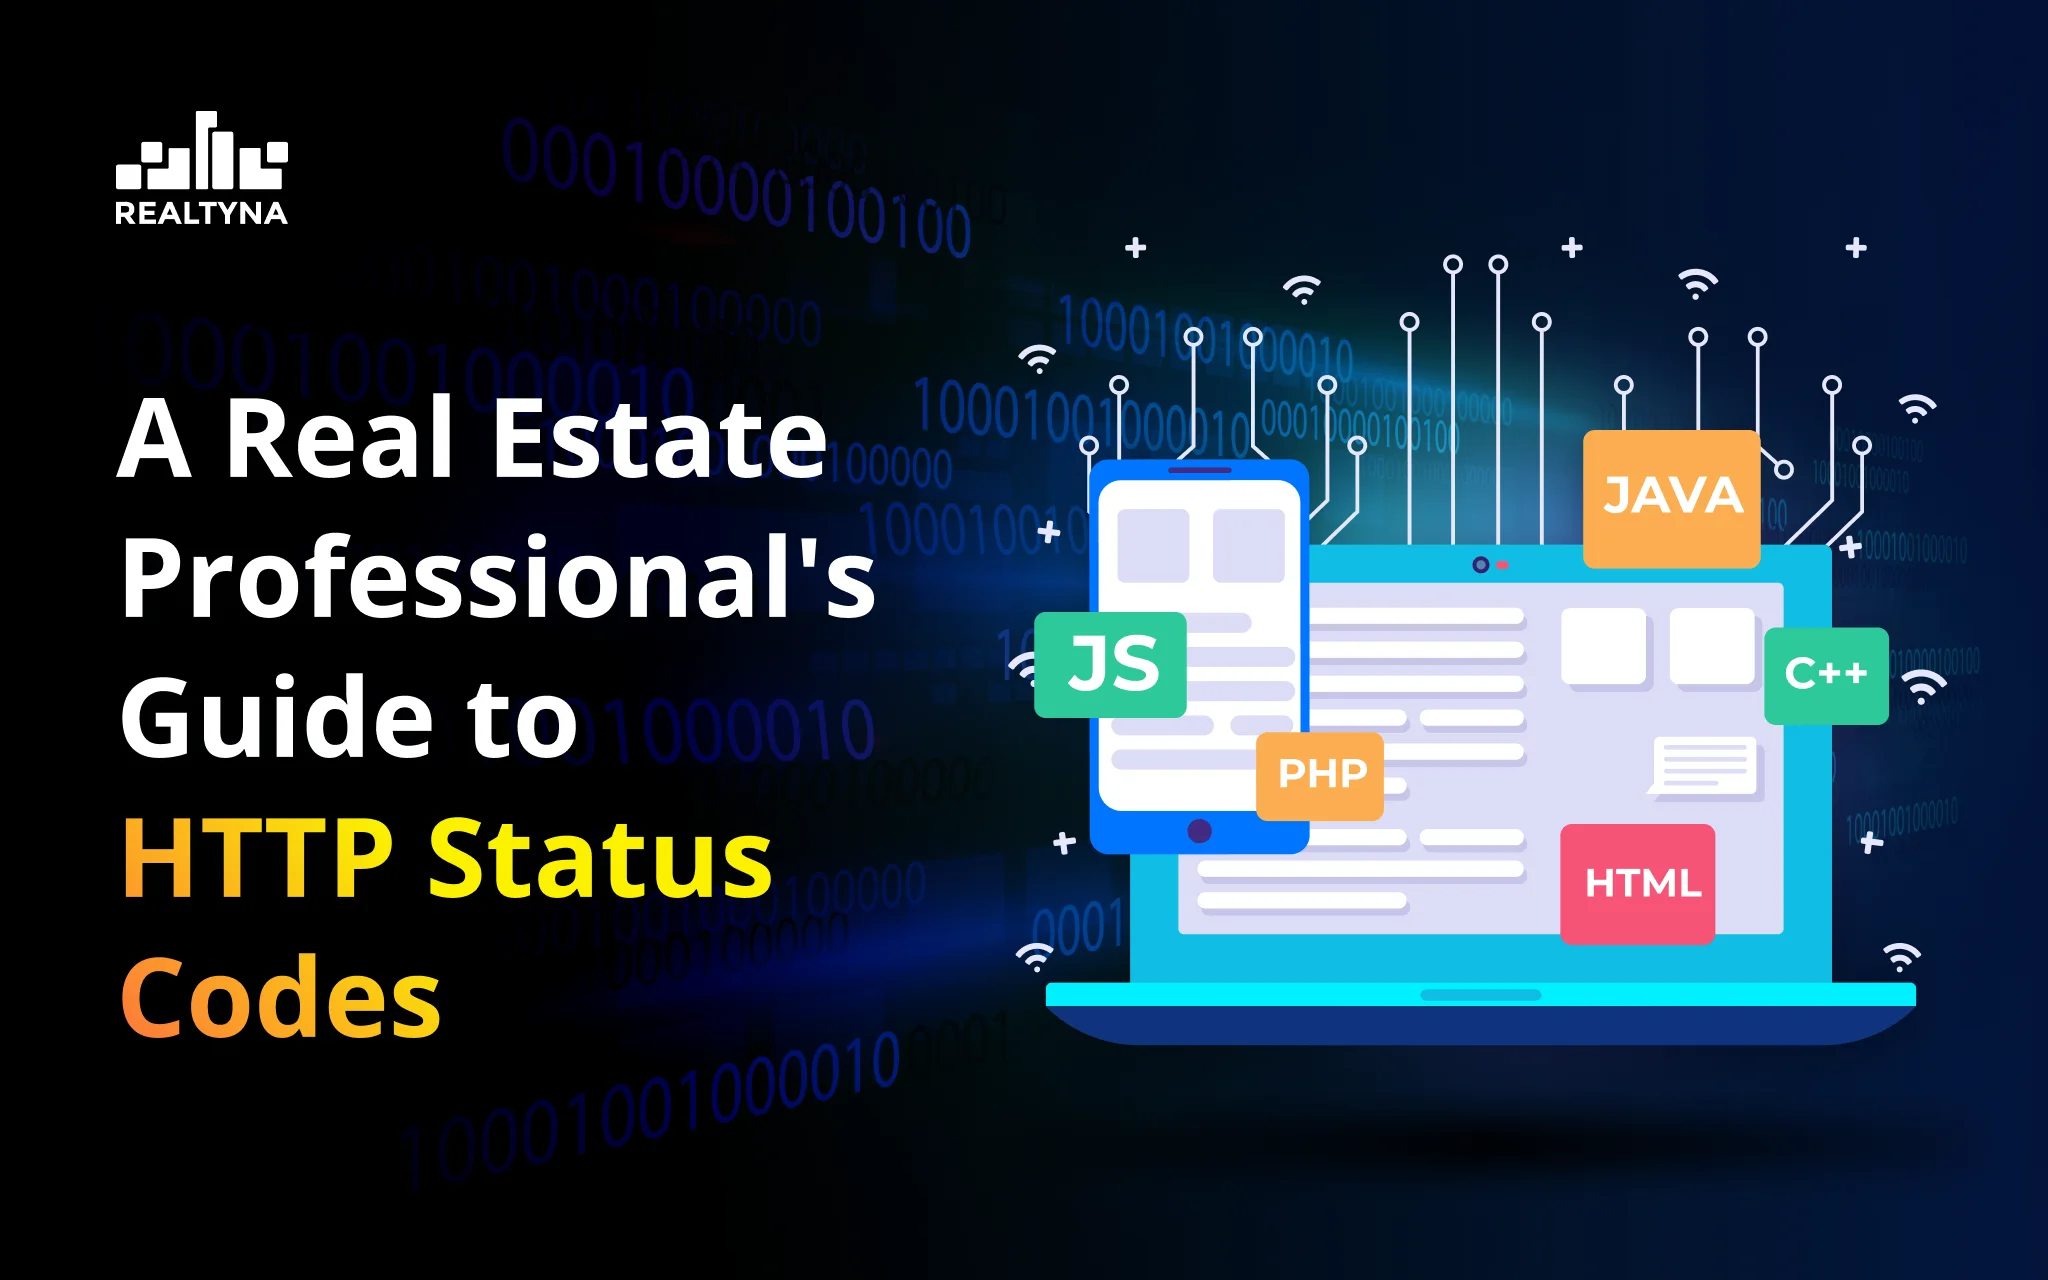 A Real Estate Professional's Guide to HTTP Status Codes